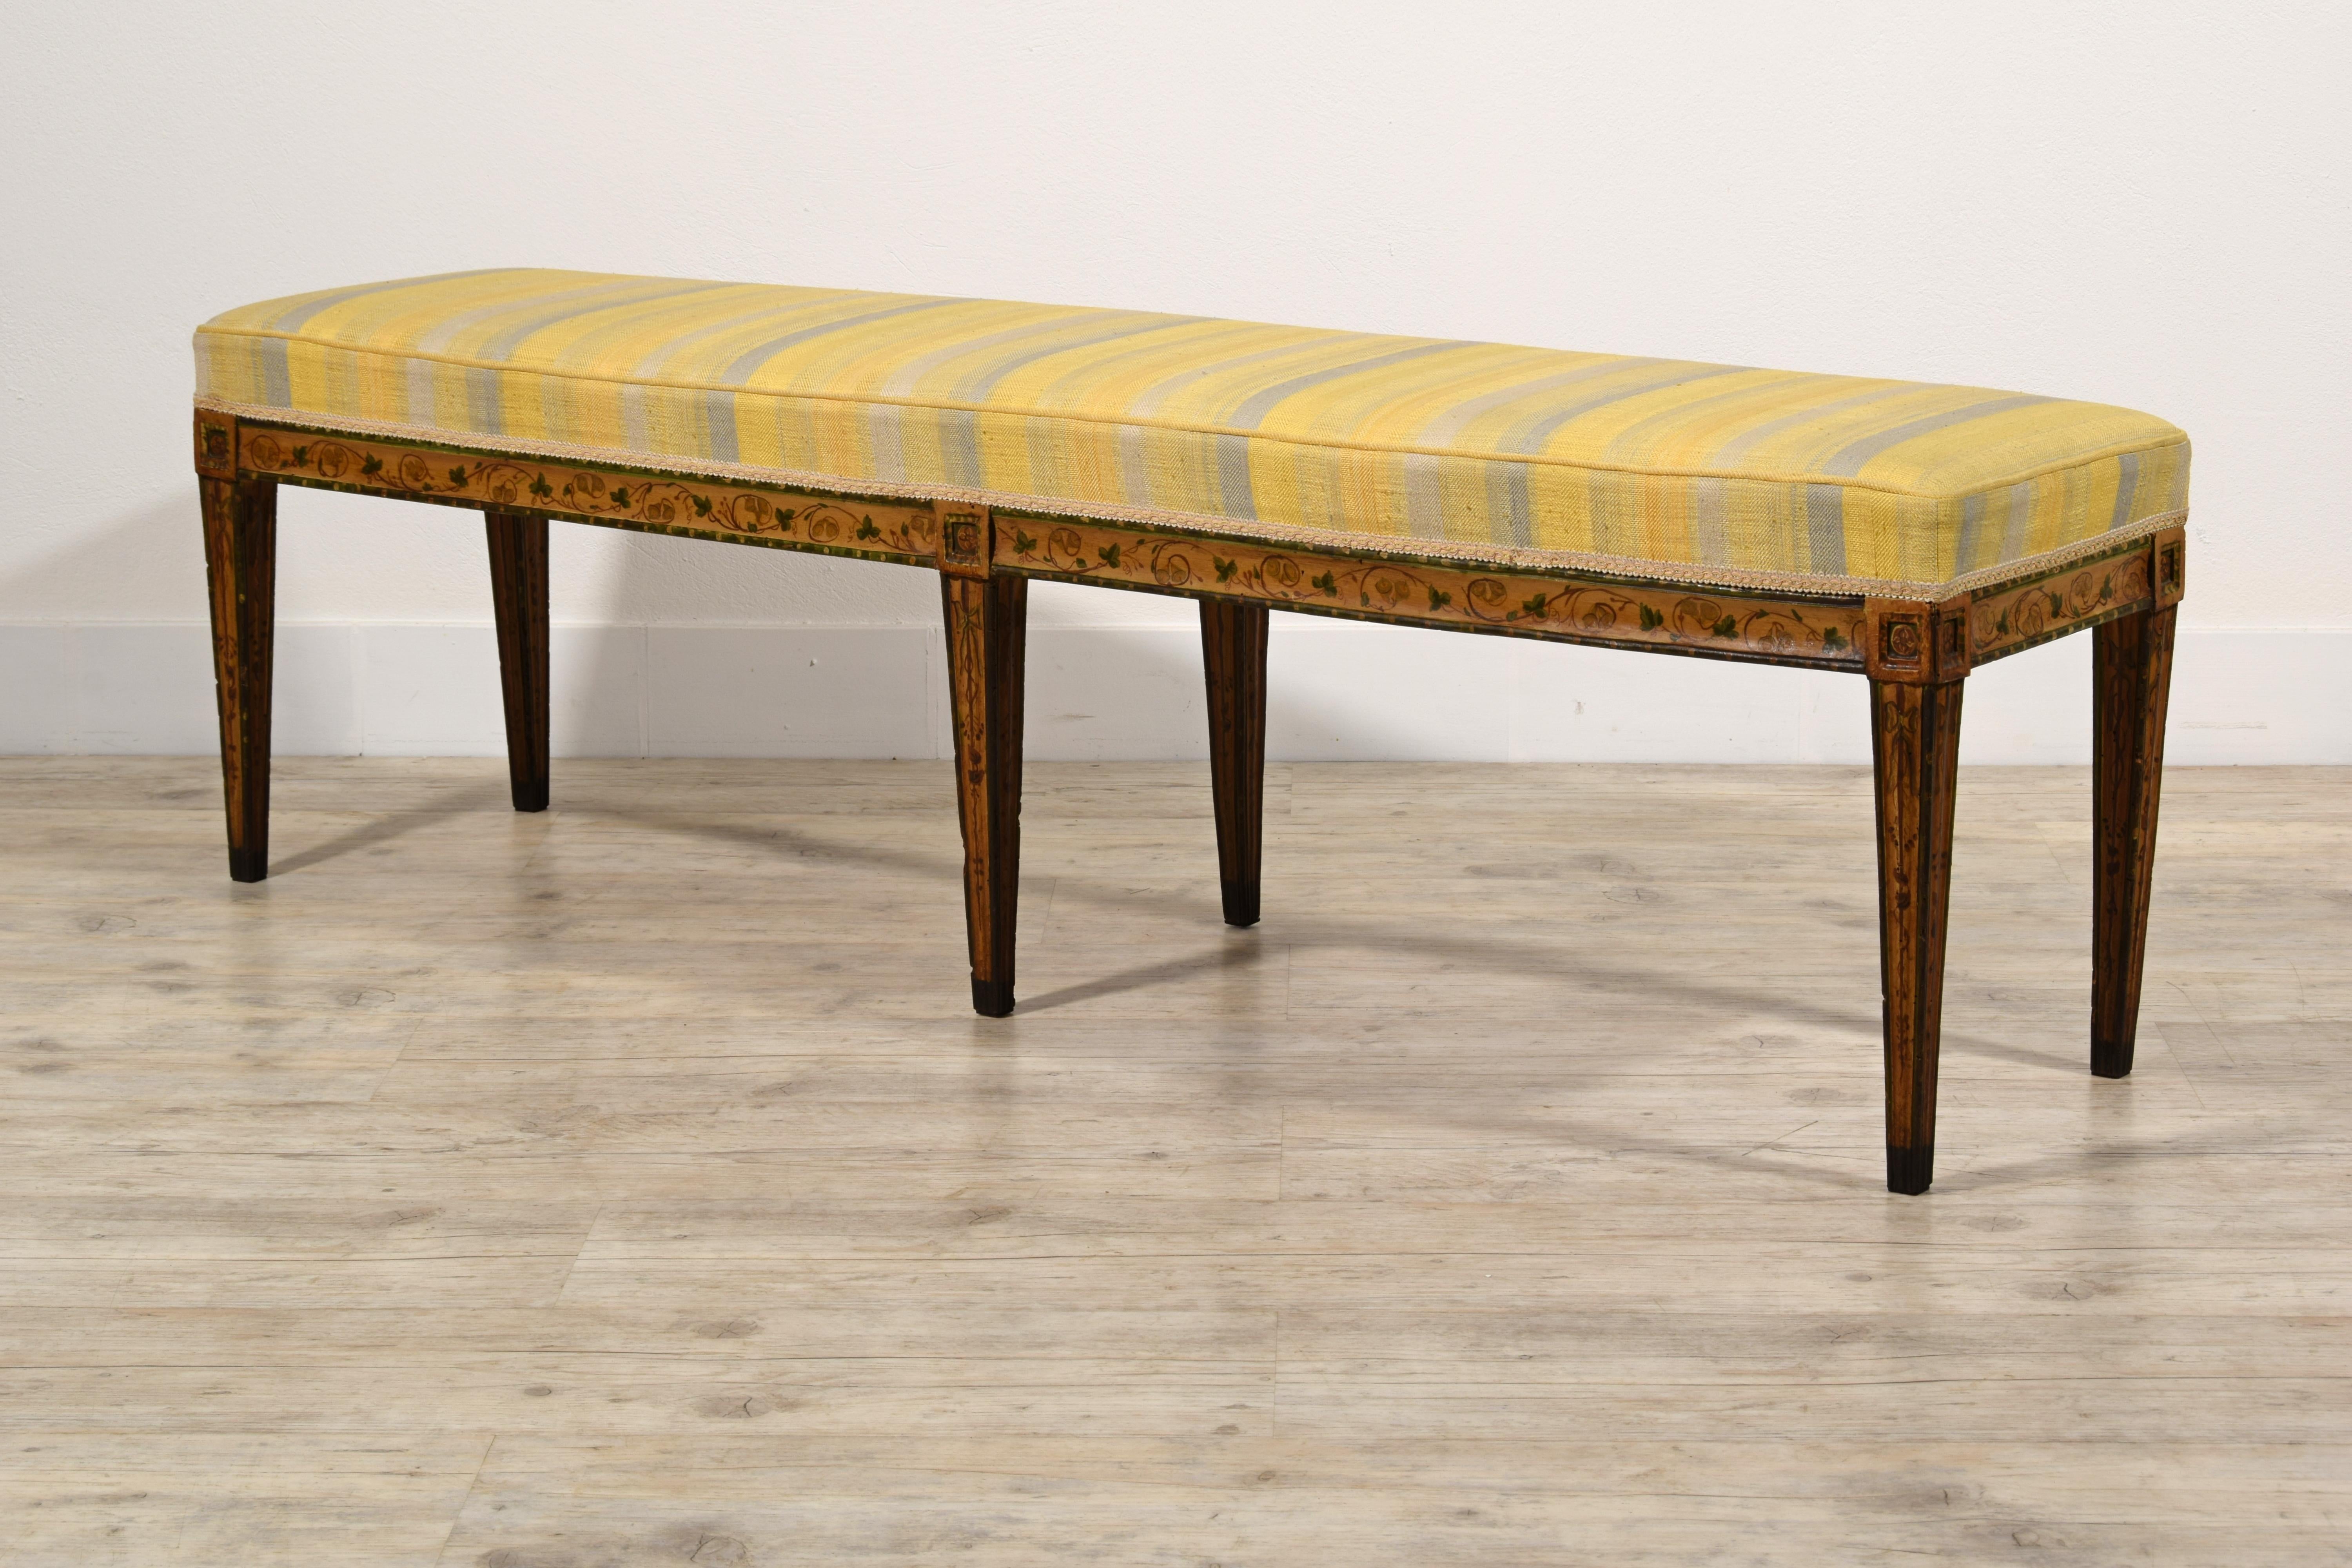 19th Century, Italian Six-legged Centre Bench Lacquered Wood with Ramage Motive 11